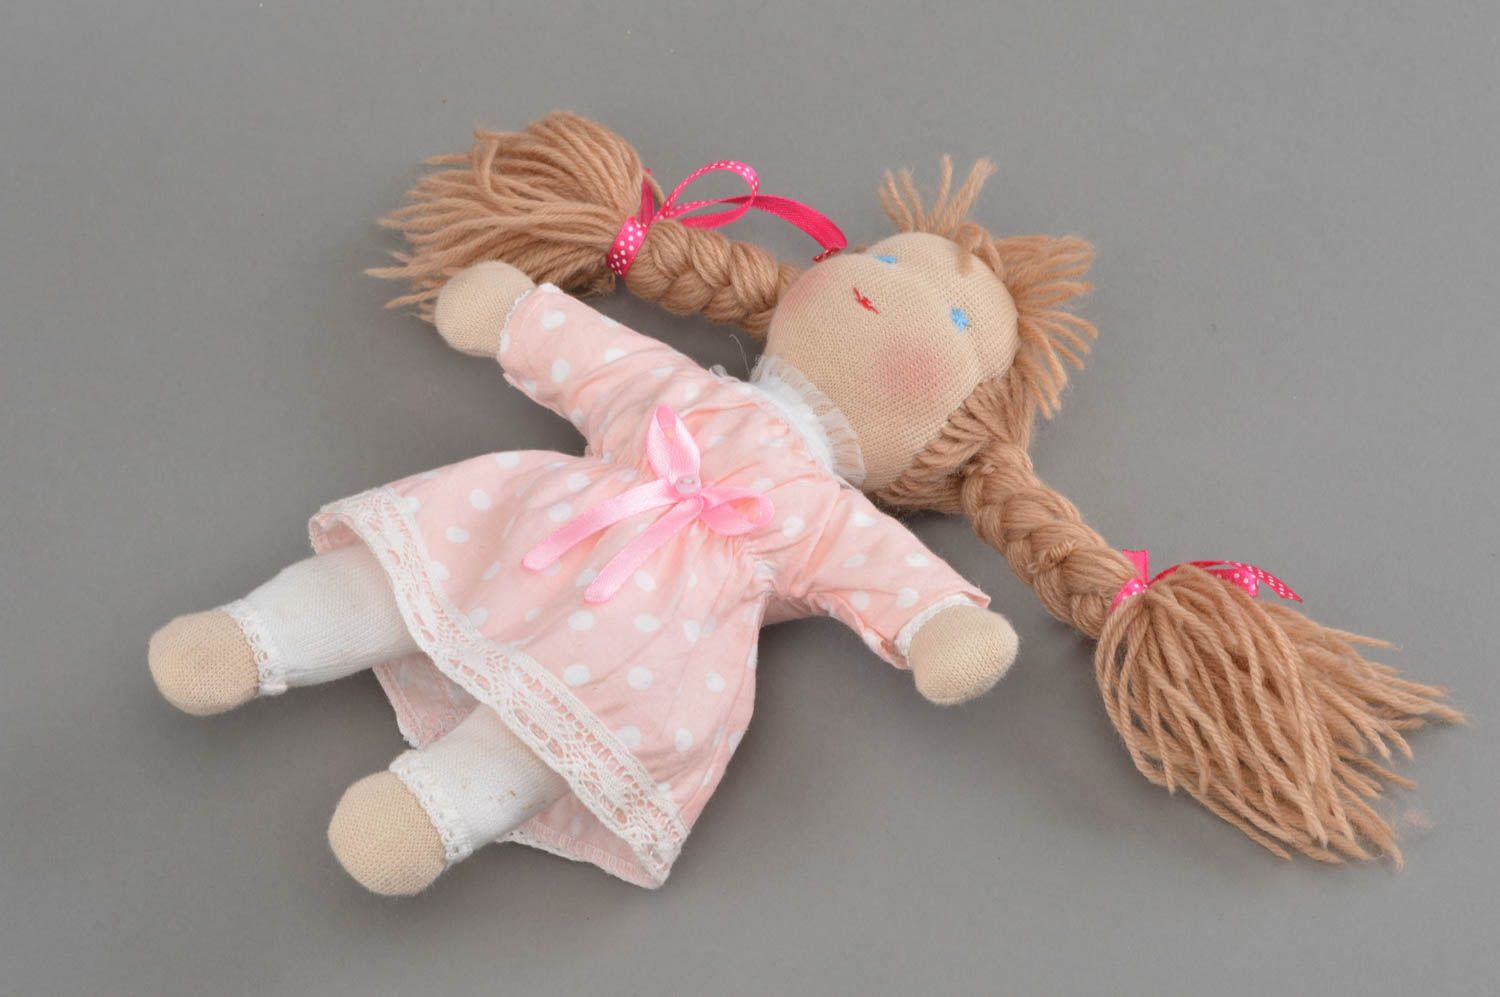 Doll made of natural fabrics handmade soft toy stuffed toy for children photo 3